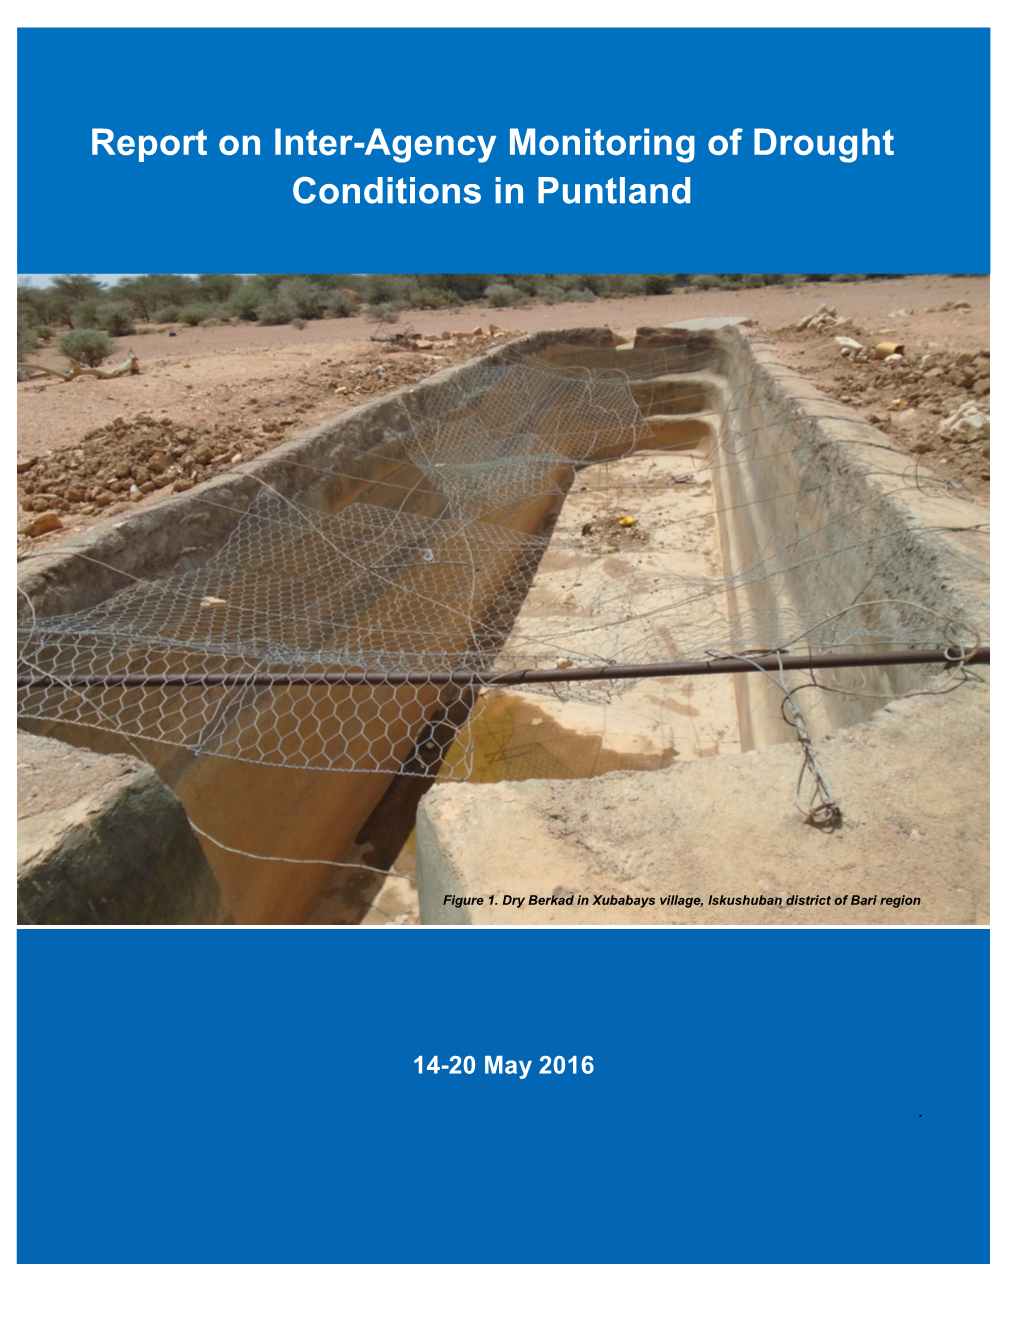 Report on Inter-Agency Monitoring of Drought Conditions in Puntland